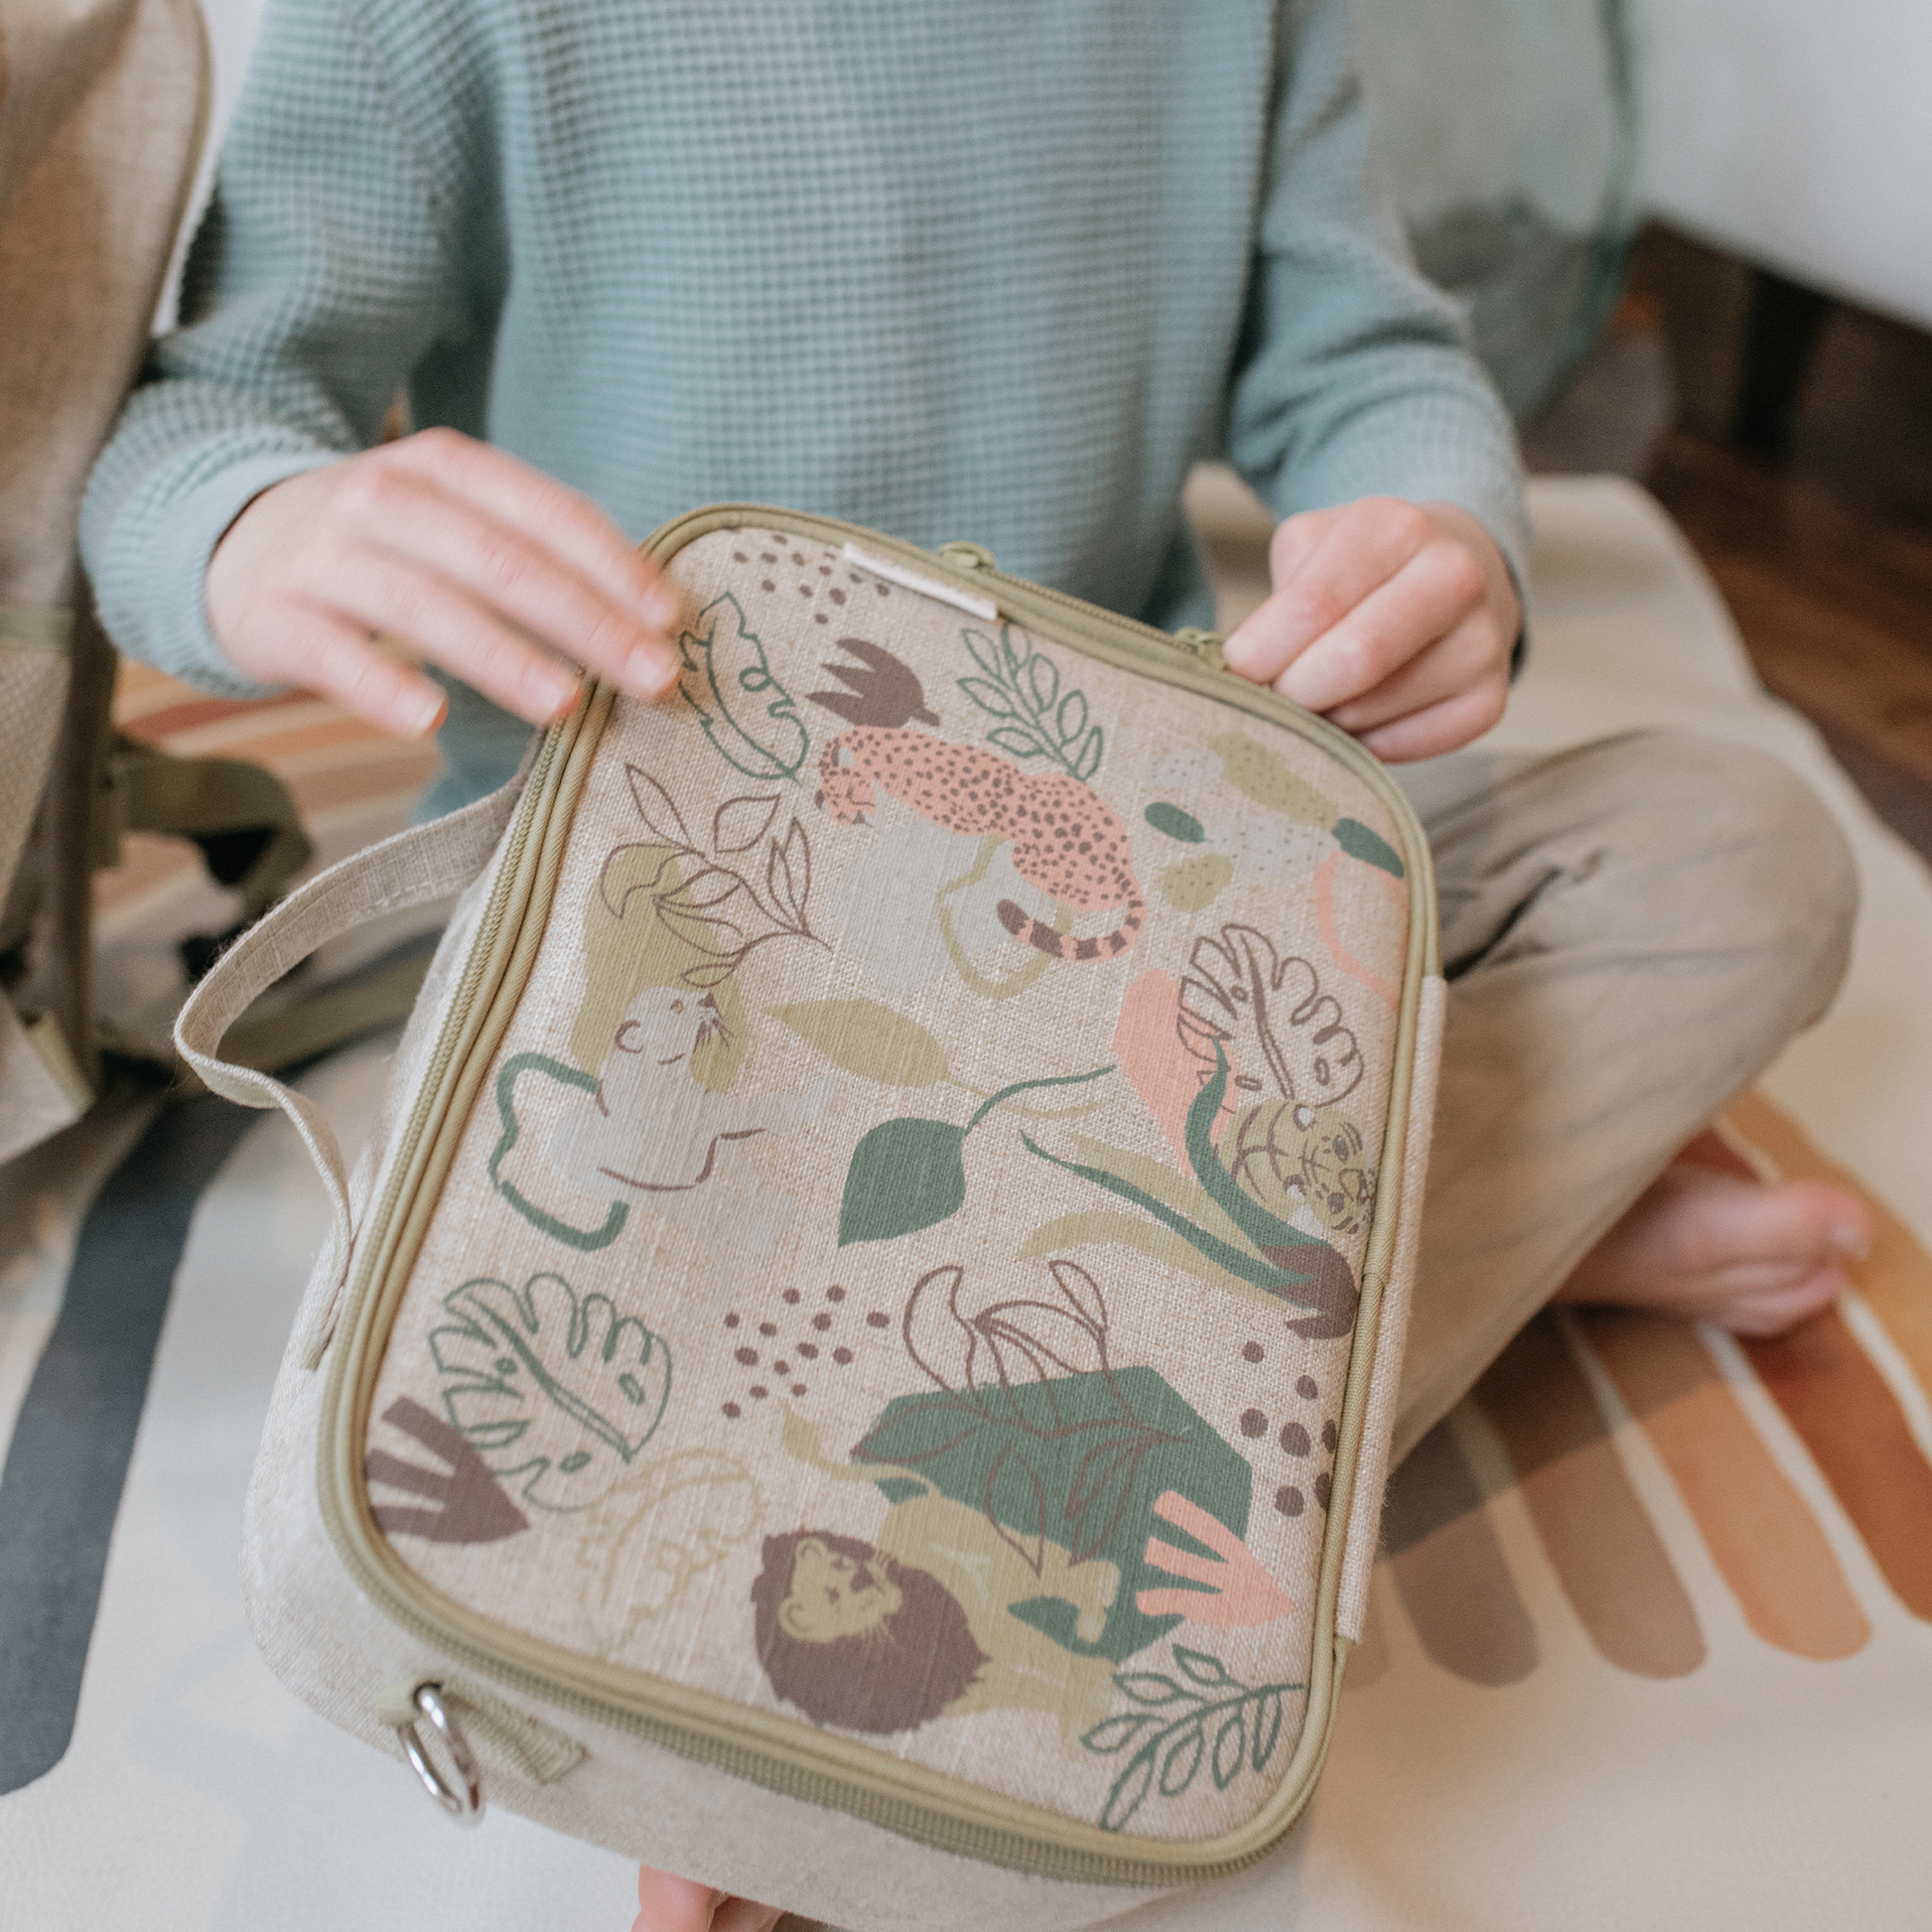 SoYoung Kids Lunch Box – the oth lof+